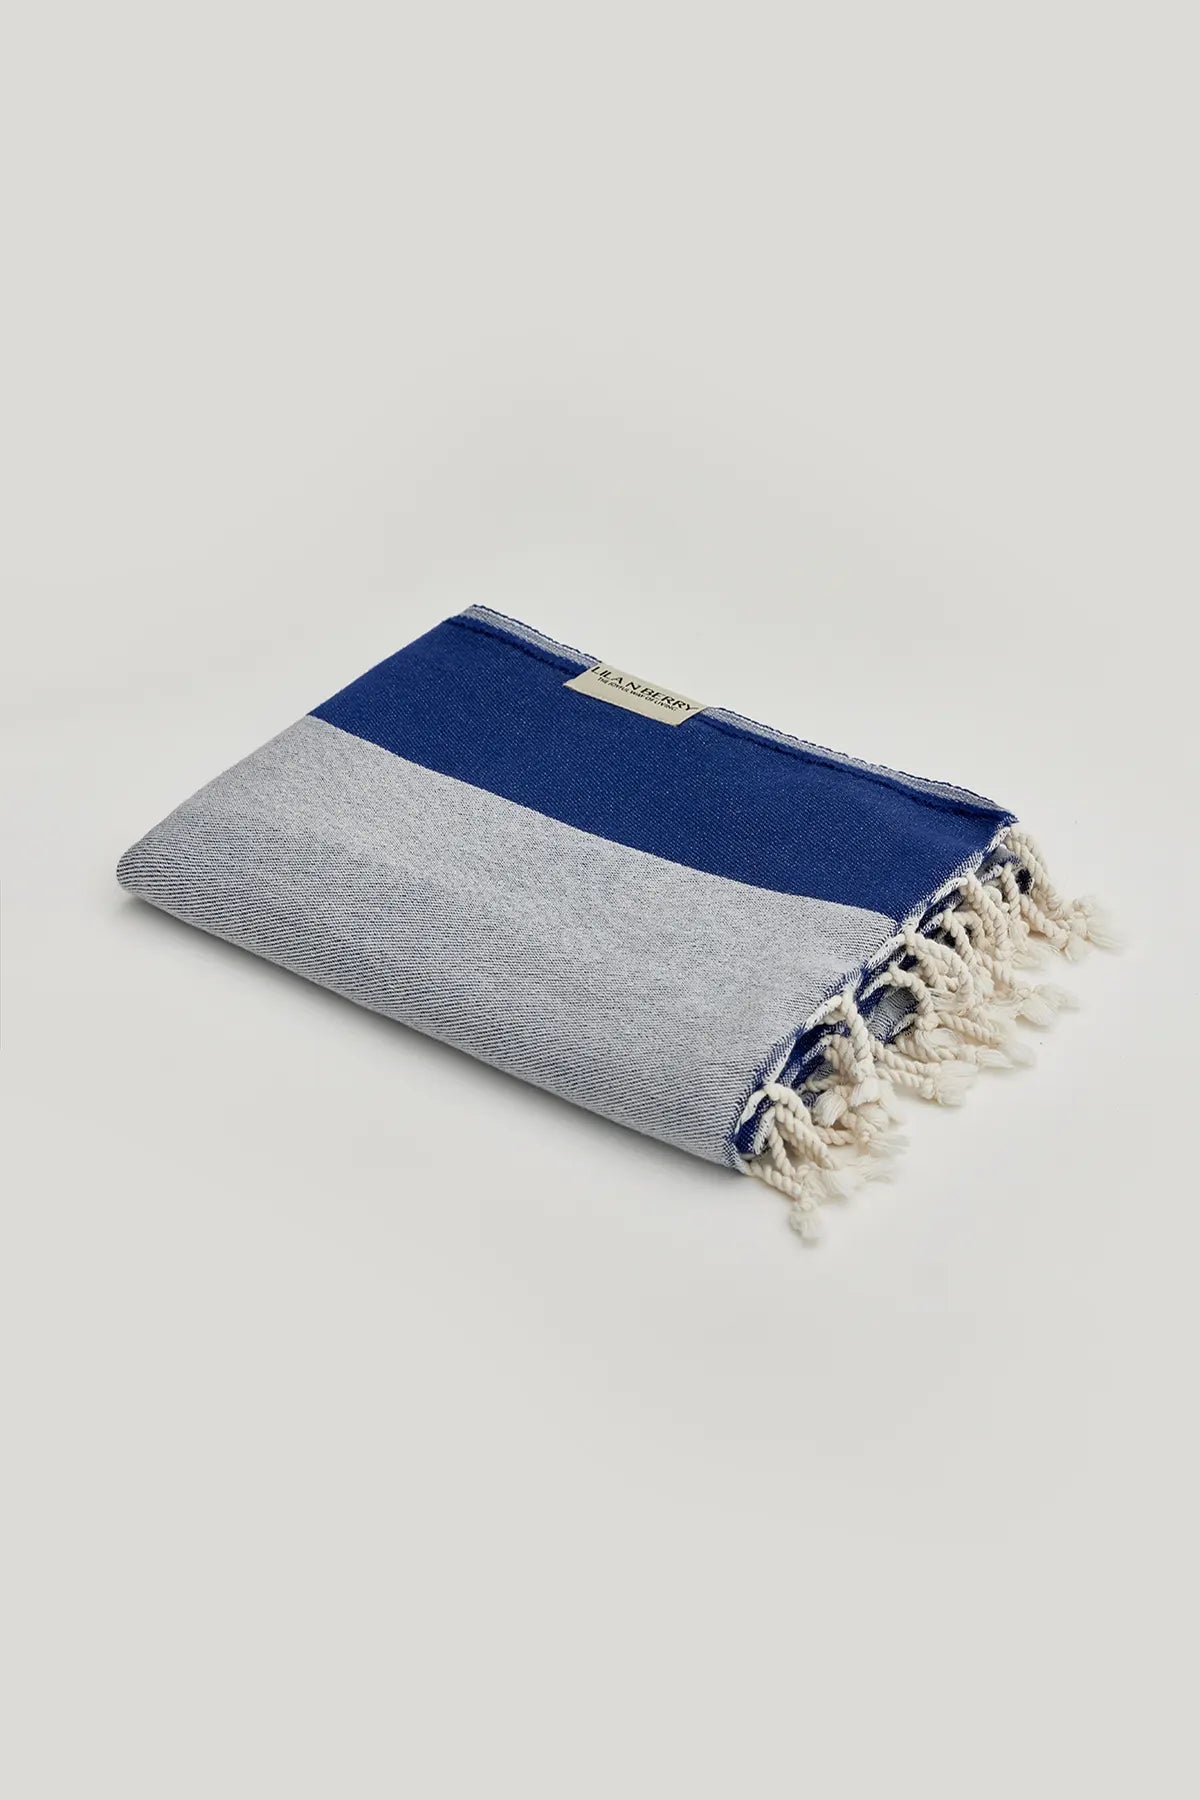 Beach/Bath,Indigo,Turkish towel, folded,summer,line patterned,double-faces,purified sand,light,compact, easy pack,fun, recycled